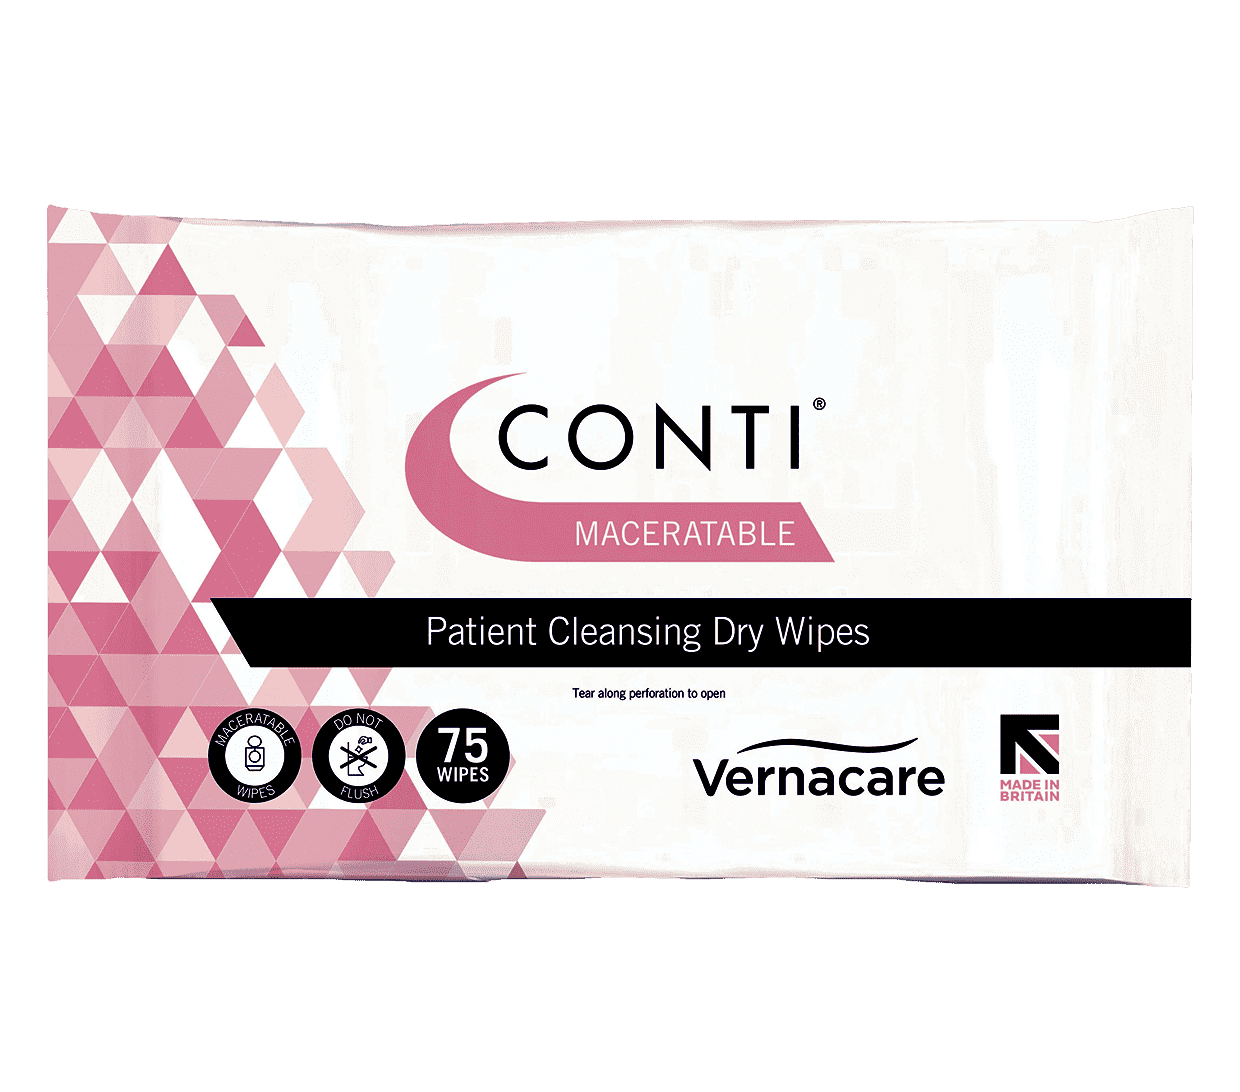 Dry patient wipes which are made from cellulose fibres making this heavy-weight patient dry wipe provide a more environmentally friendly option, designed to be dispersed once used in the hospital's macerator.